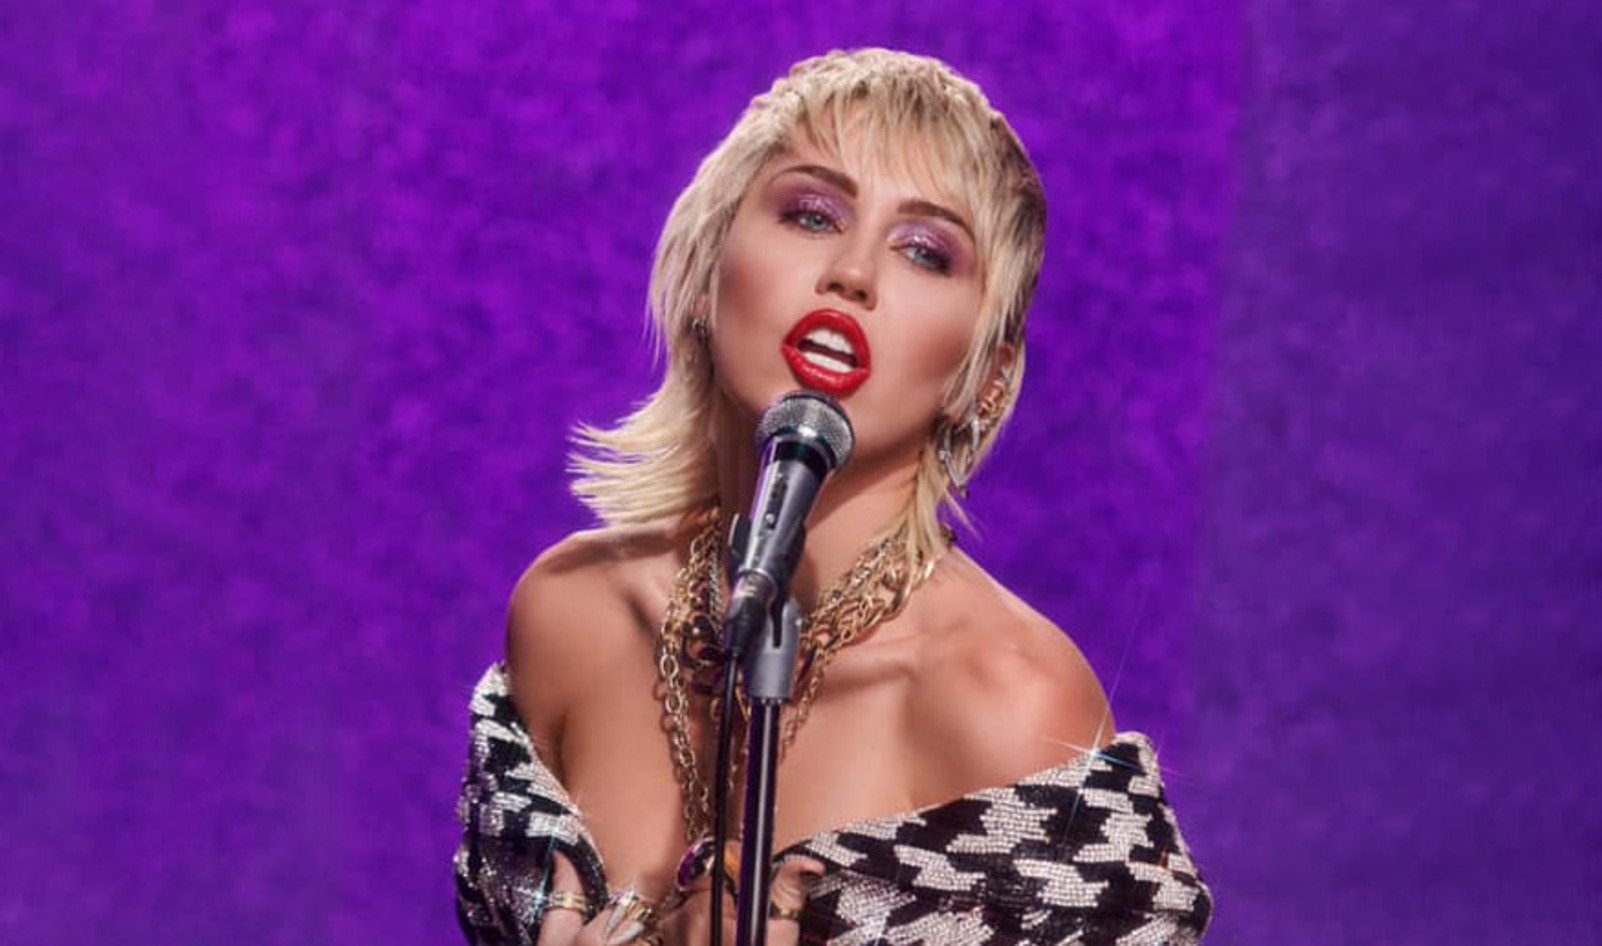 Miley Cyrus on Ditching Veganism: “I Think When You Become the Face of Something, It’s a Lot of Pressure.”&nbsp;